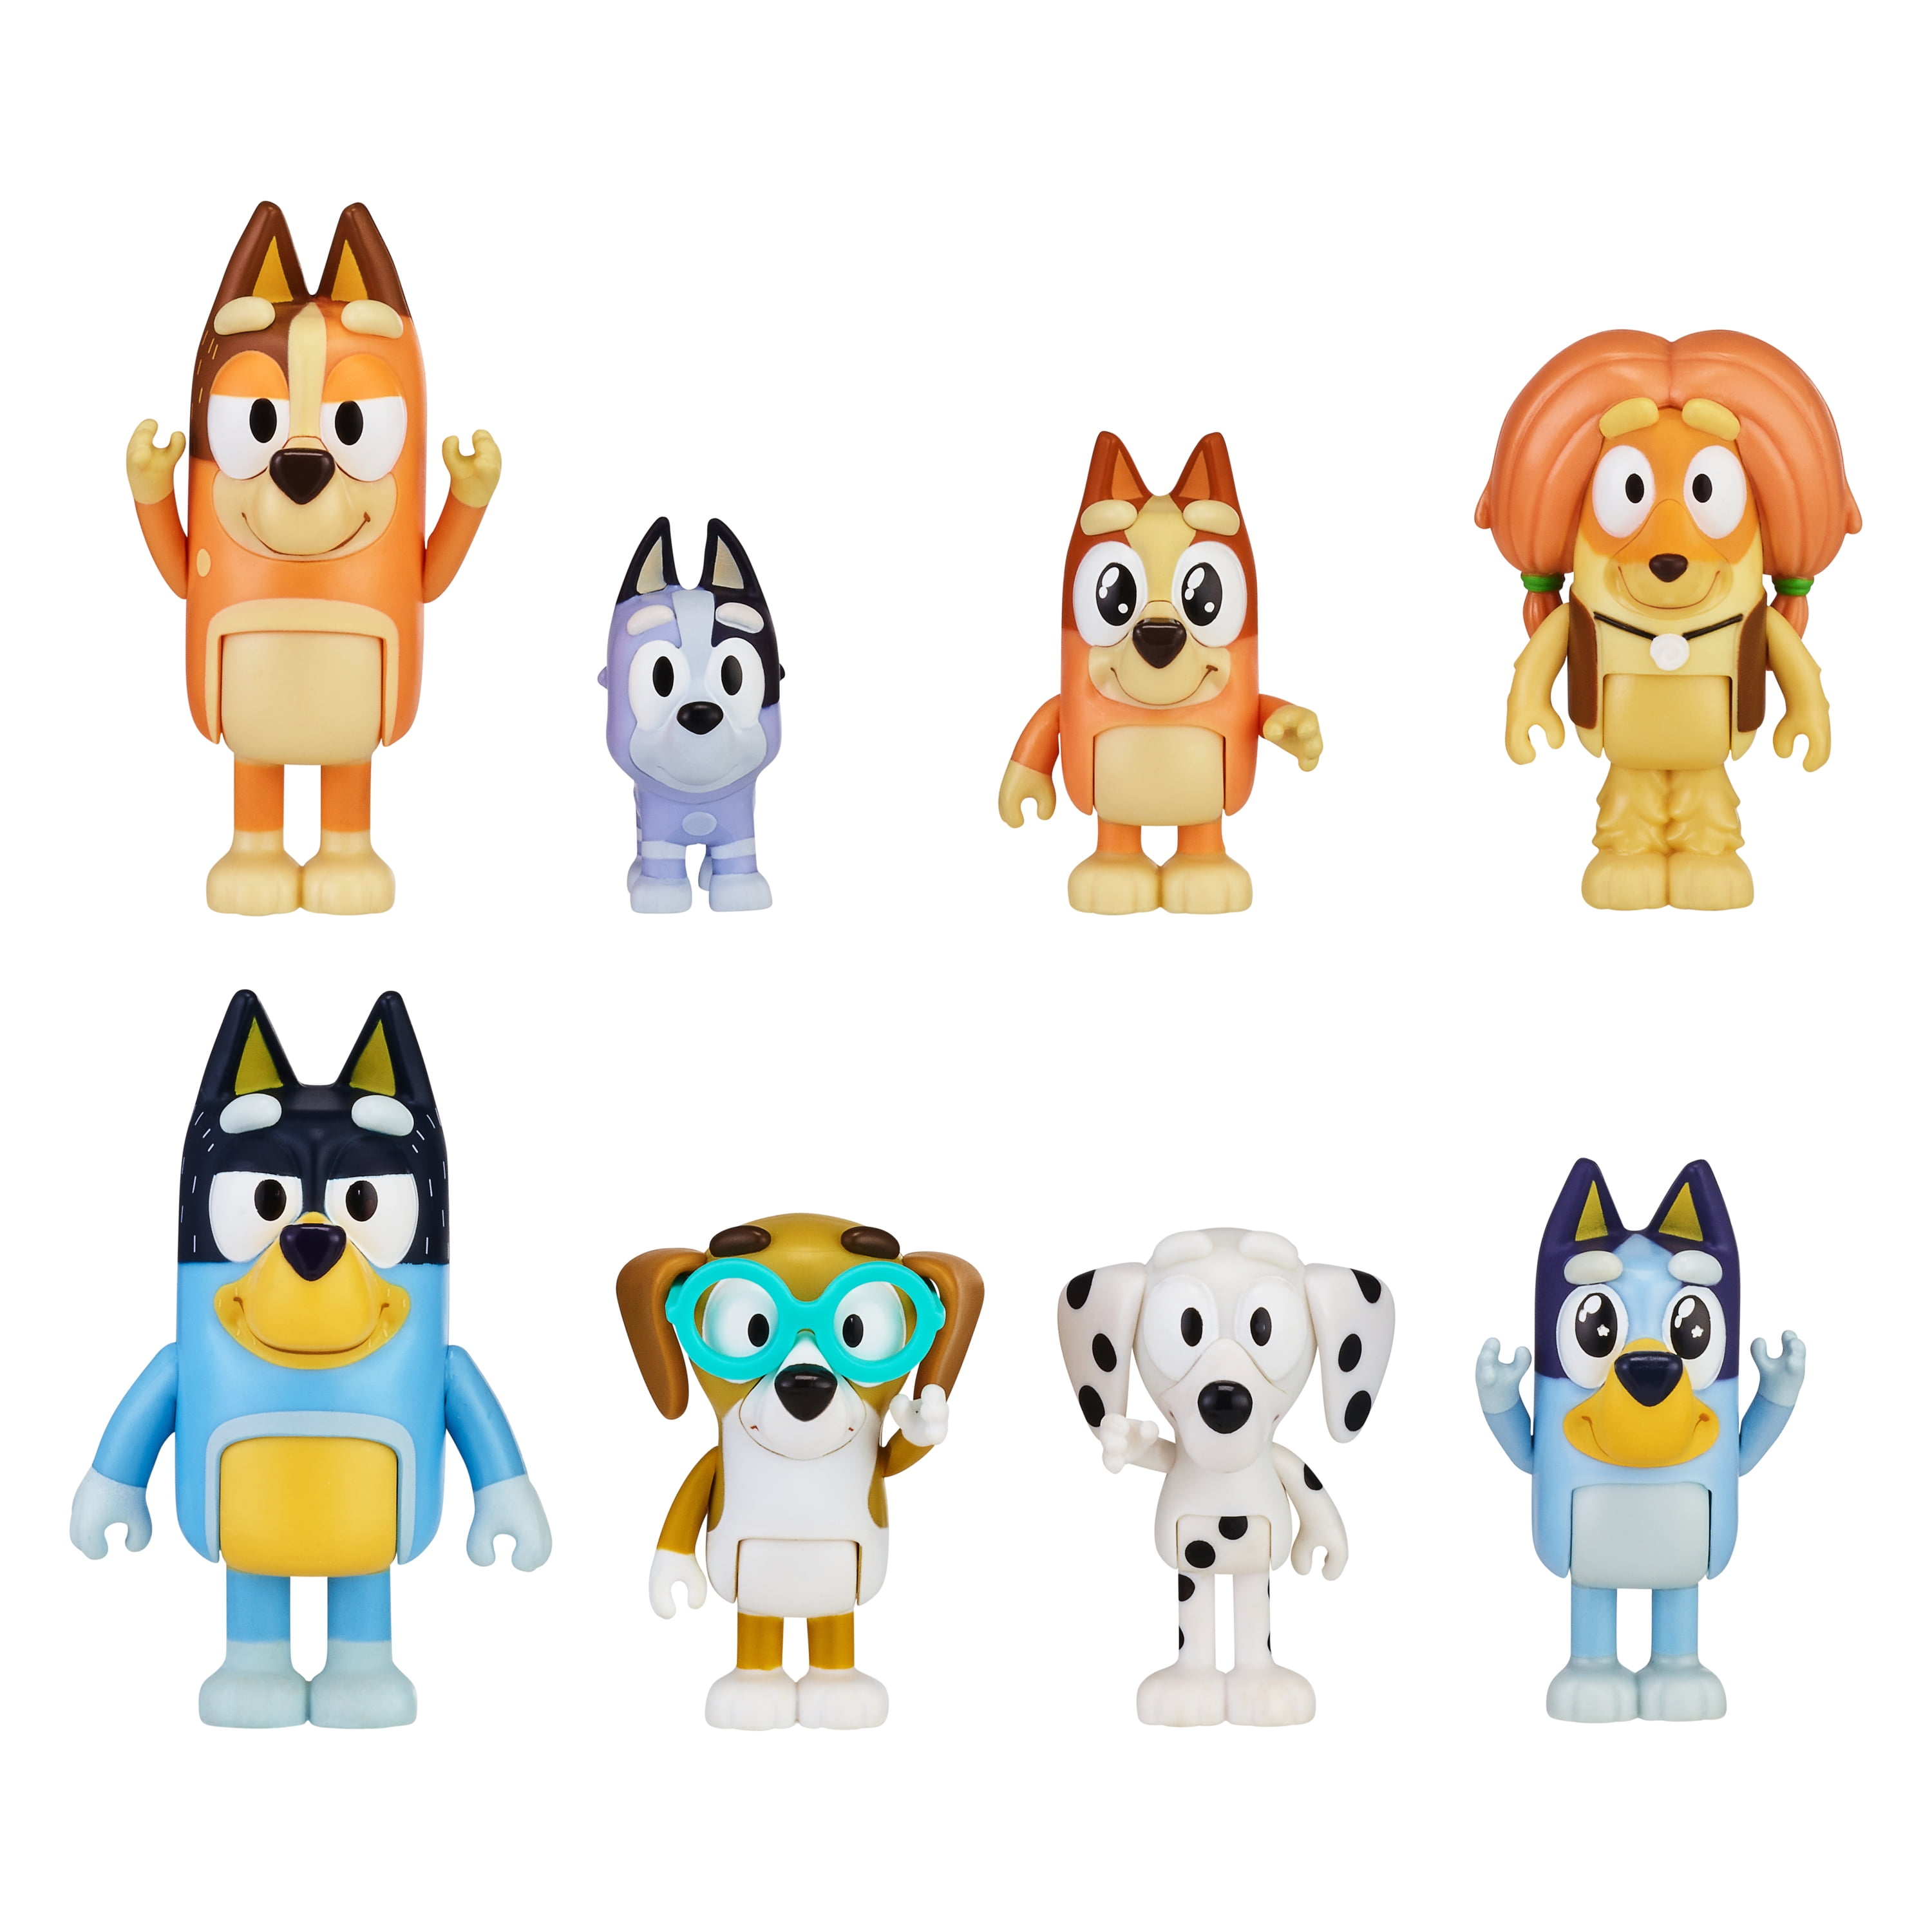 Bluey's Family and Friends - 8 Pack - 2.5-3 Bluey, Bingo, Chilli (Mum) and  Dad (Bandit), Honey, Socks, Chloe and Indy Figures 